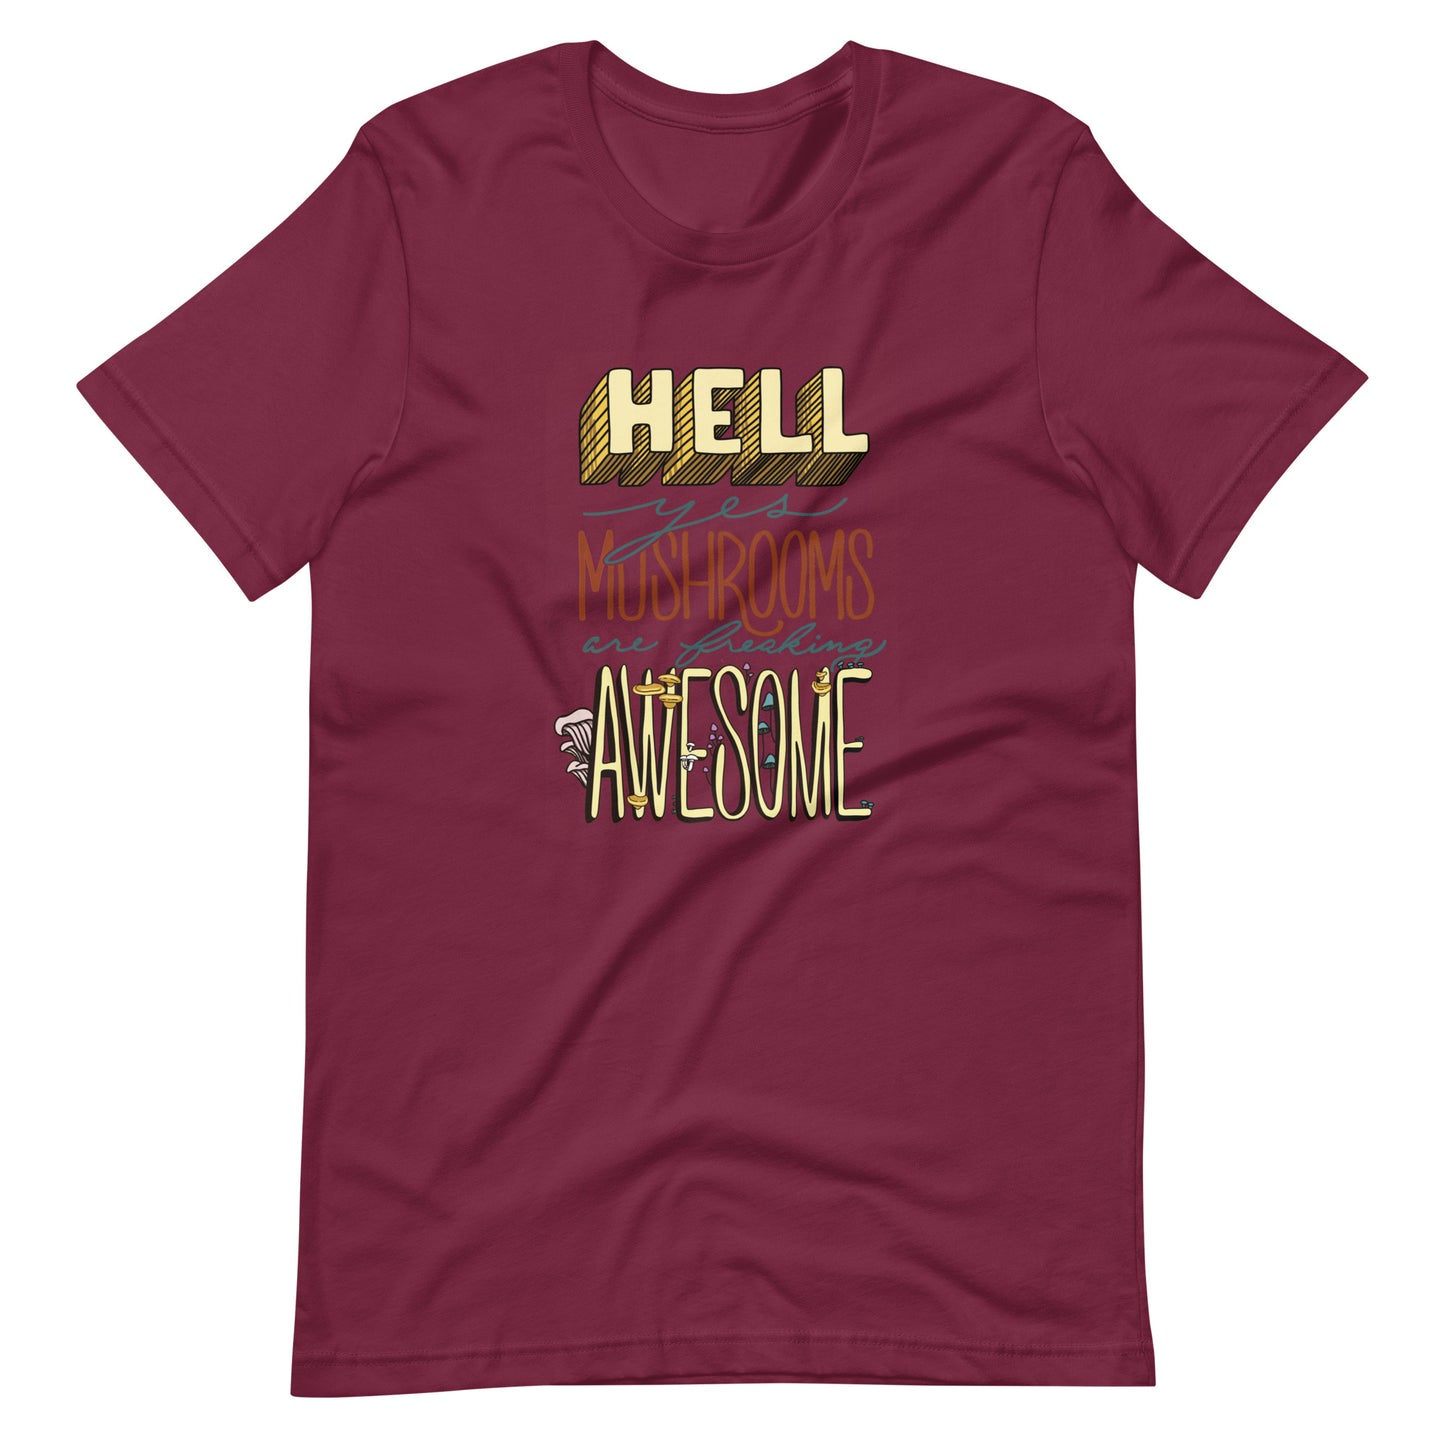 Hell Yes Mushrooms Are Freaking Awesome | Unisex T-Shirt | Funny Mushroom Apparel